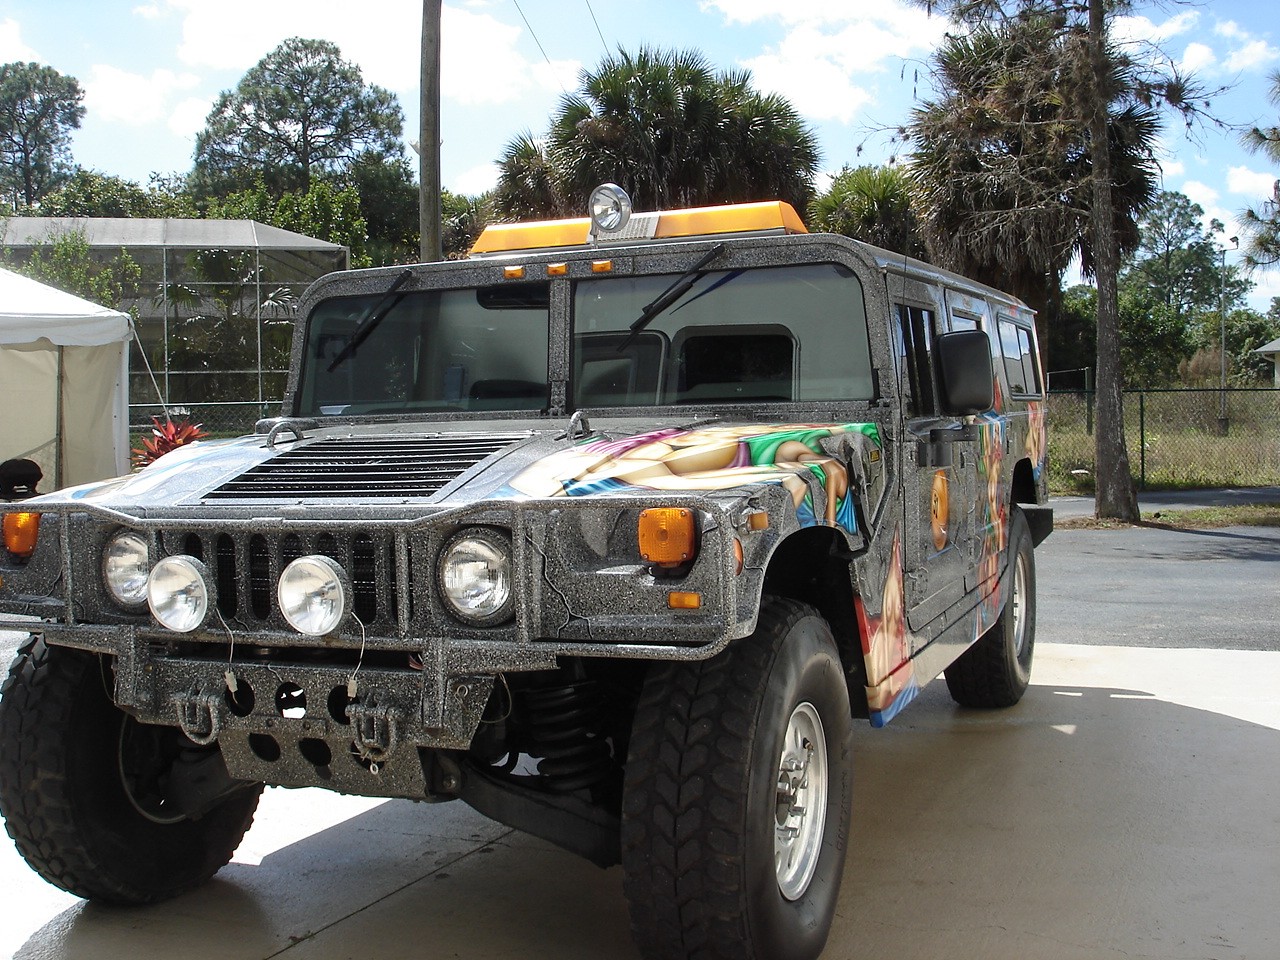 Dennis Rodman’s Hummer H1 Is Up For Sale, But Will Kim Jong-un Buy it? 